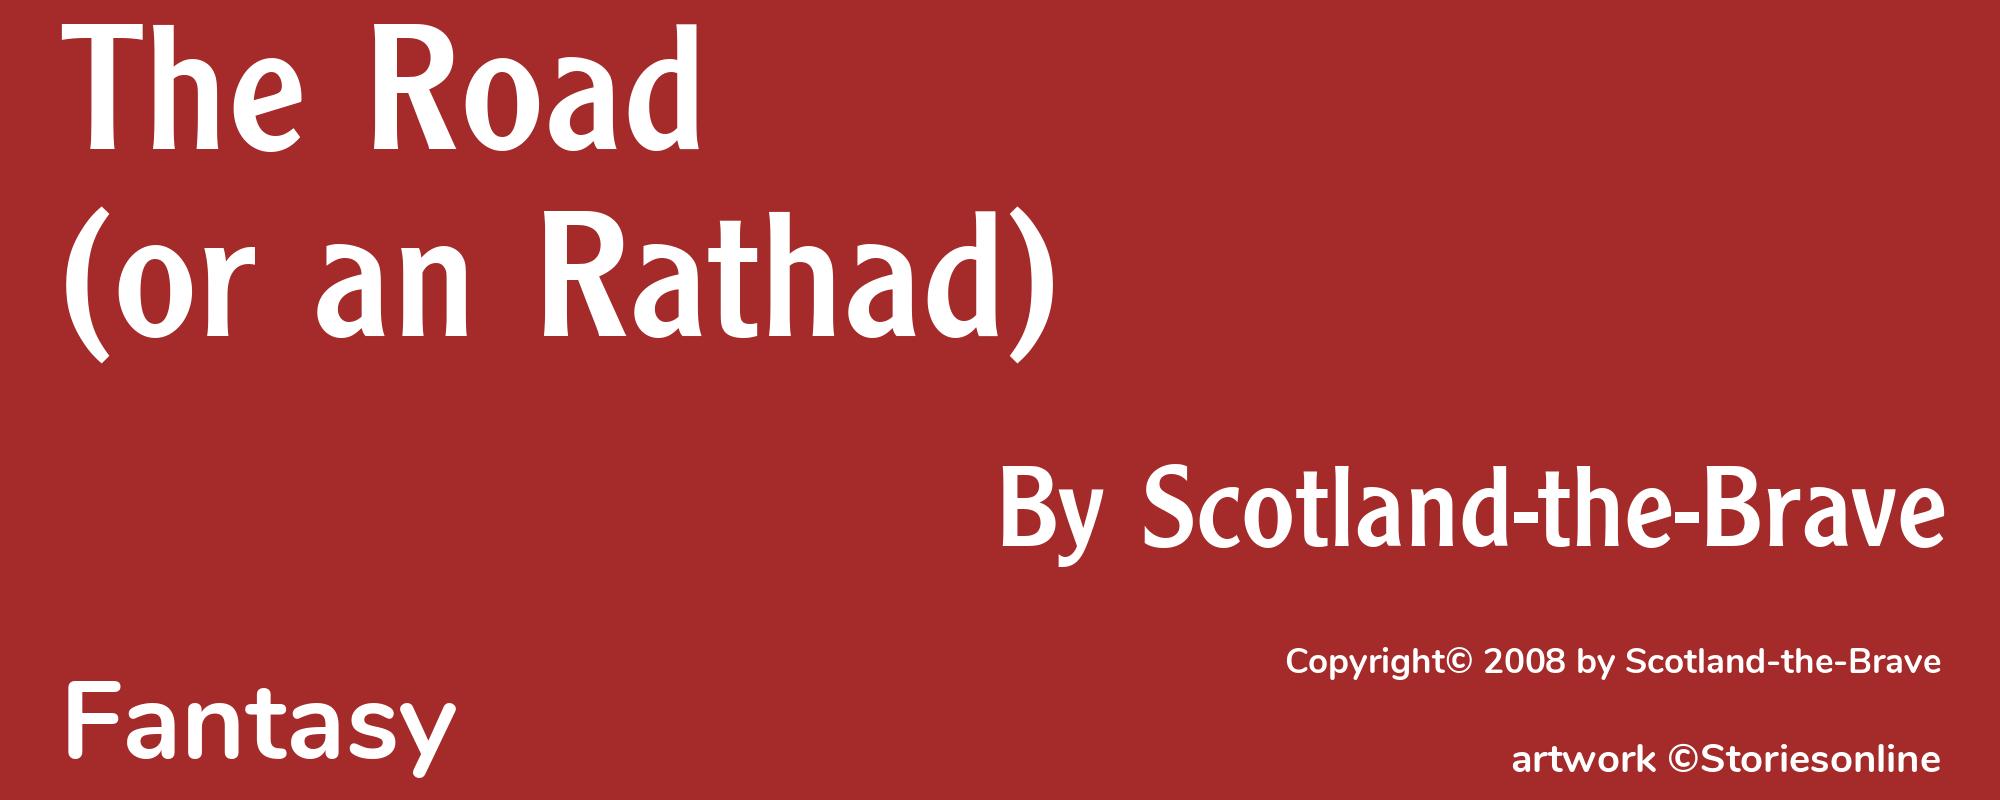 The Road (or an Rathad) - Cover